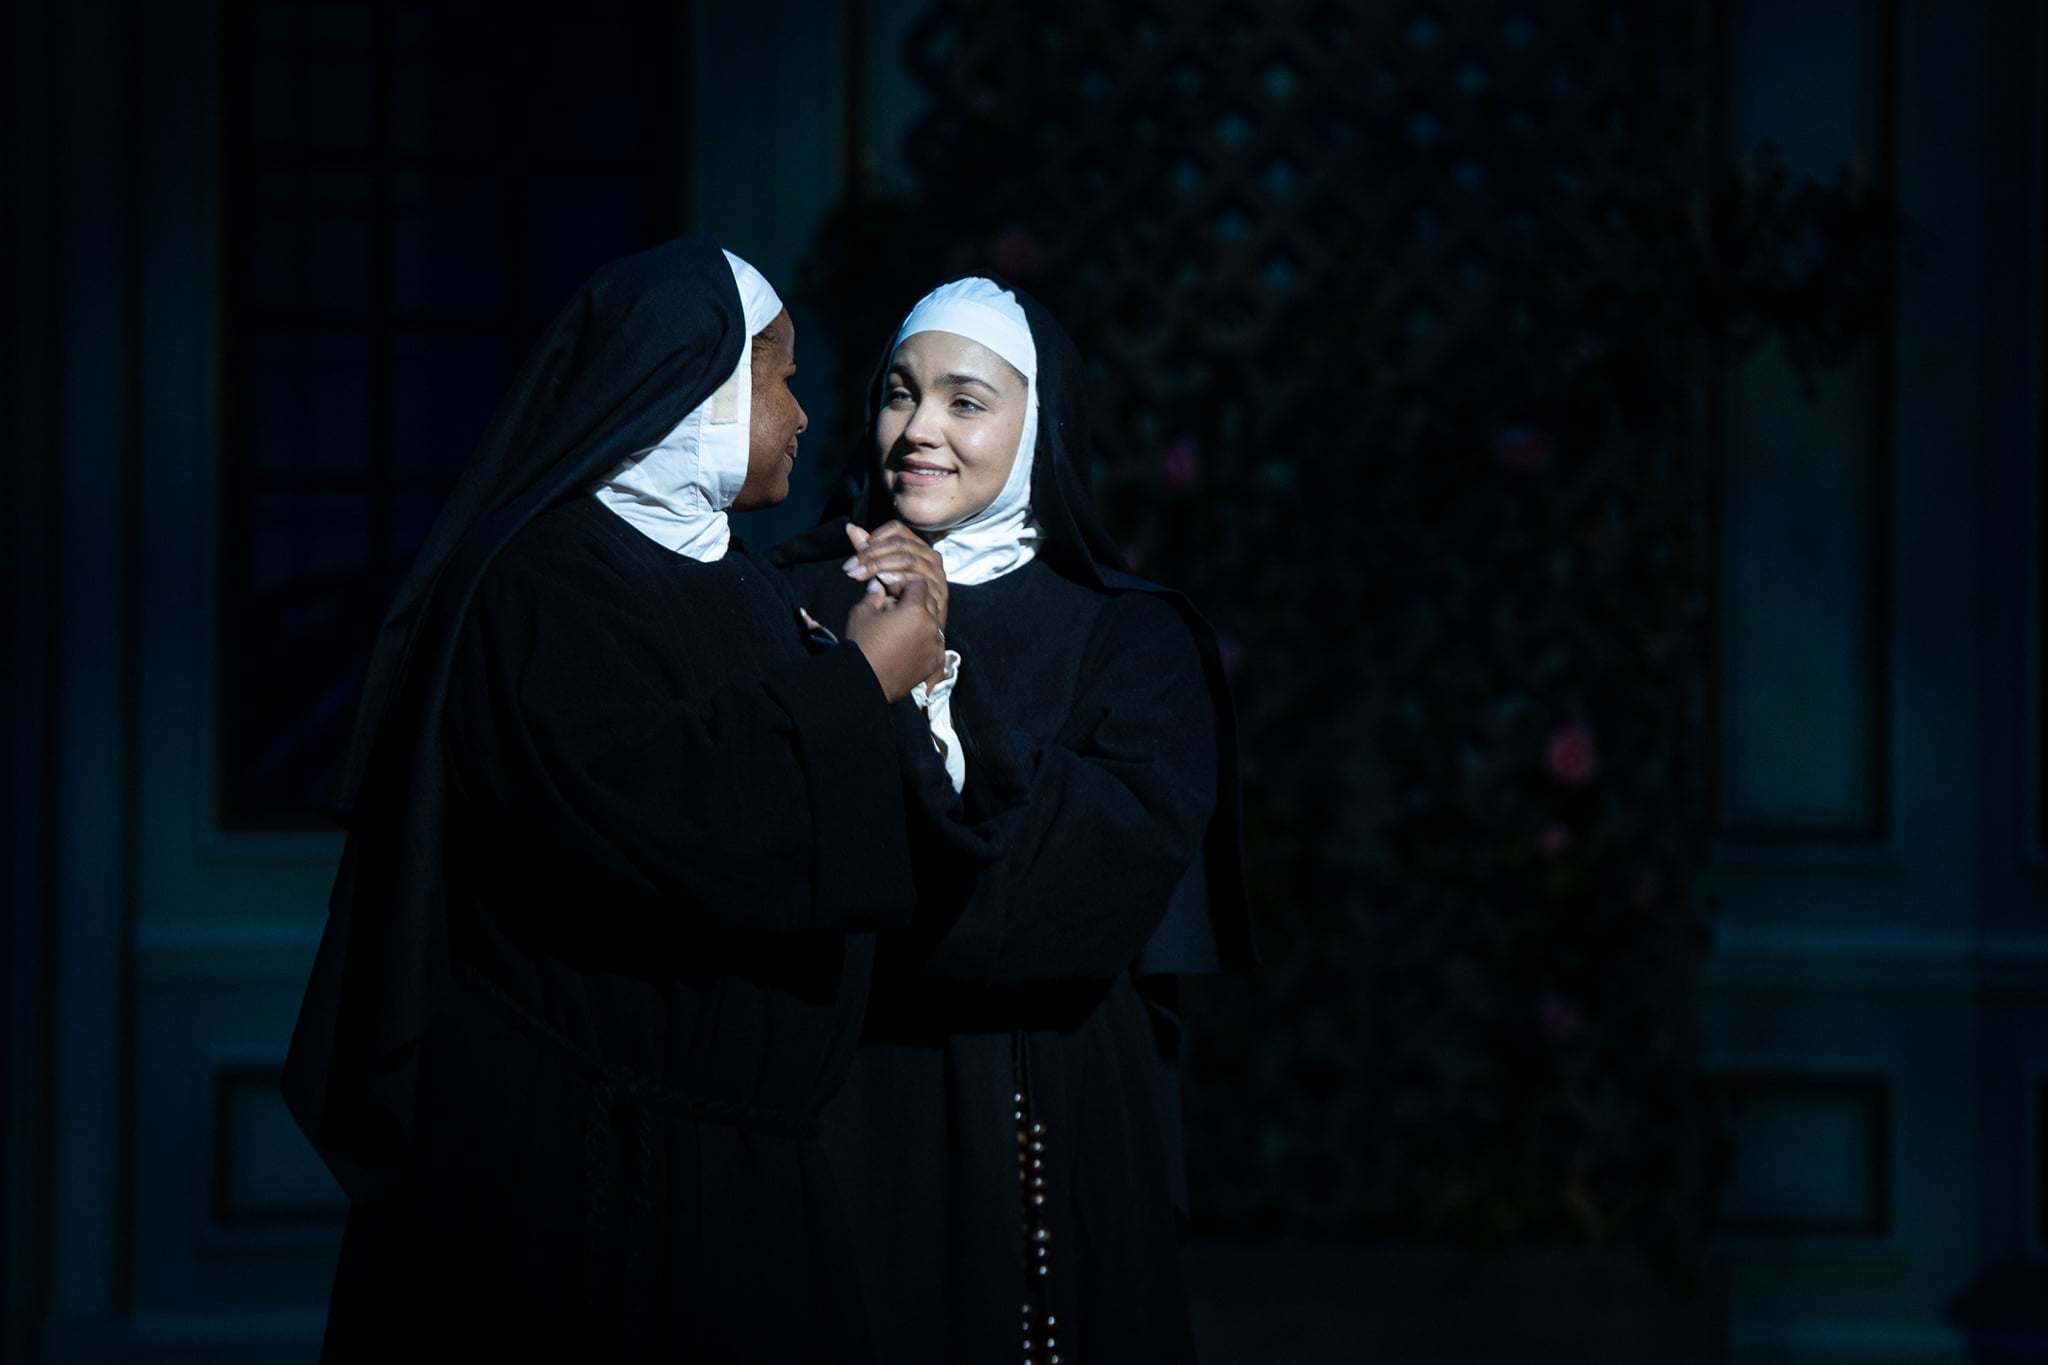 IN REVIEW: sopranos MARSHA THOMPSON in the title rôle (left) and MARGARET ANN ZENTNER as Suor Genovieffa (right) in Piedmont Opera's October 2021 production of Giacomo Puccini's SUOR ANGELICA [Photograph © by Piedmont Opera]